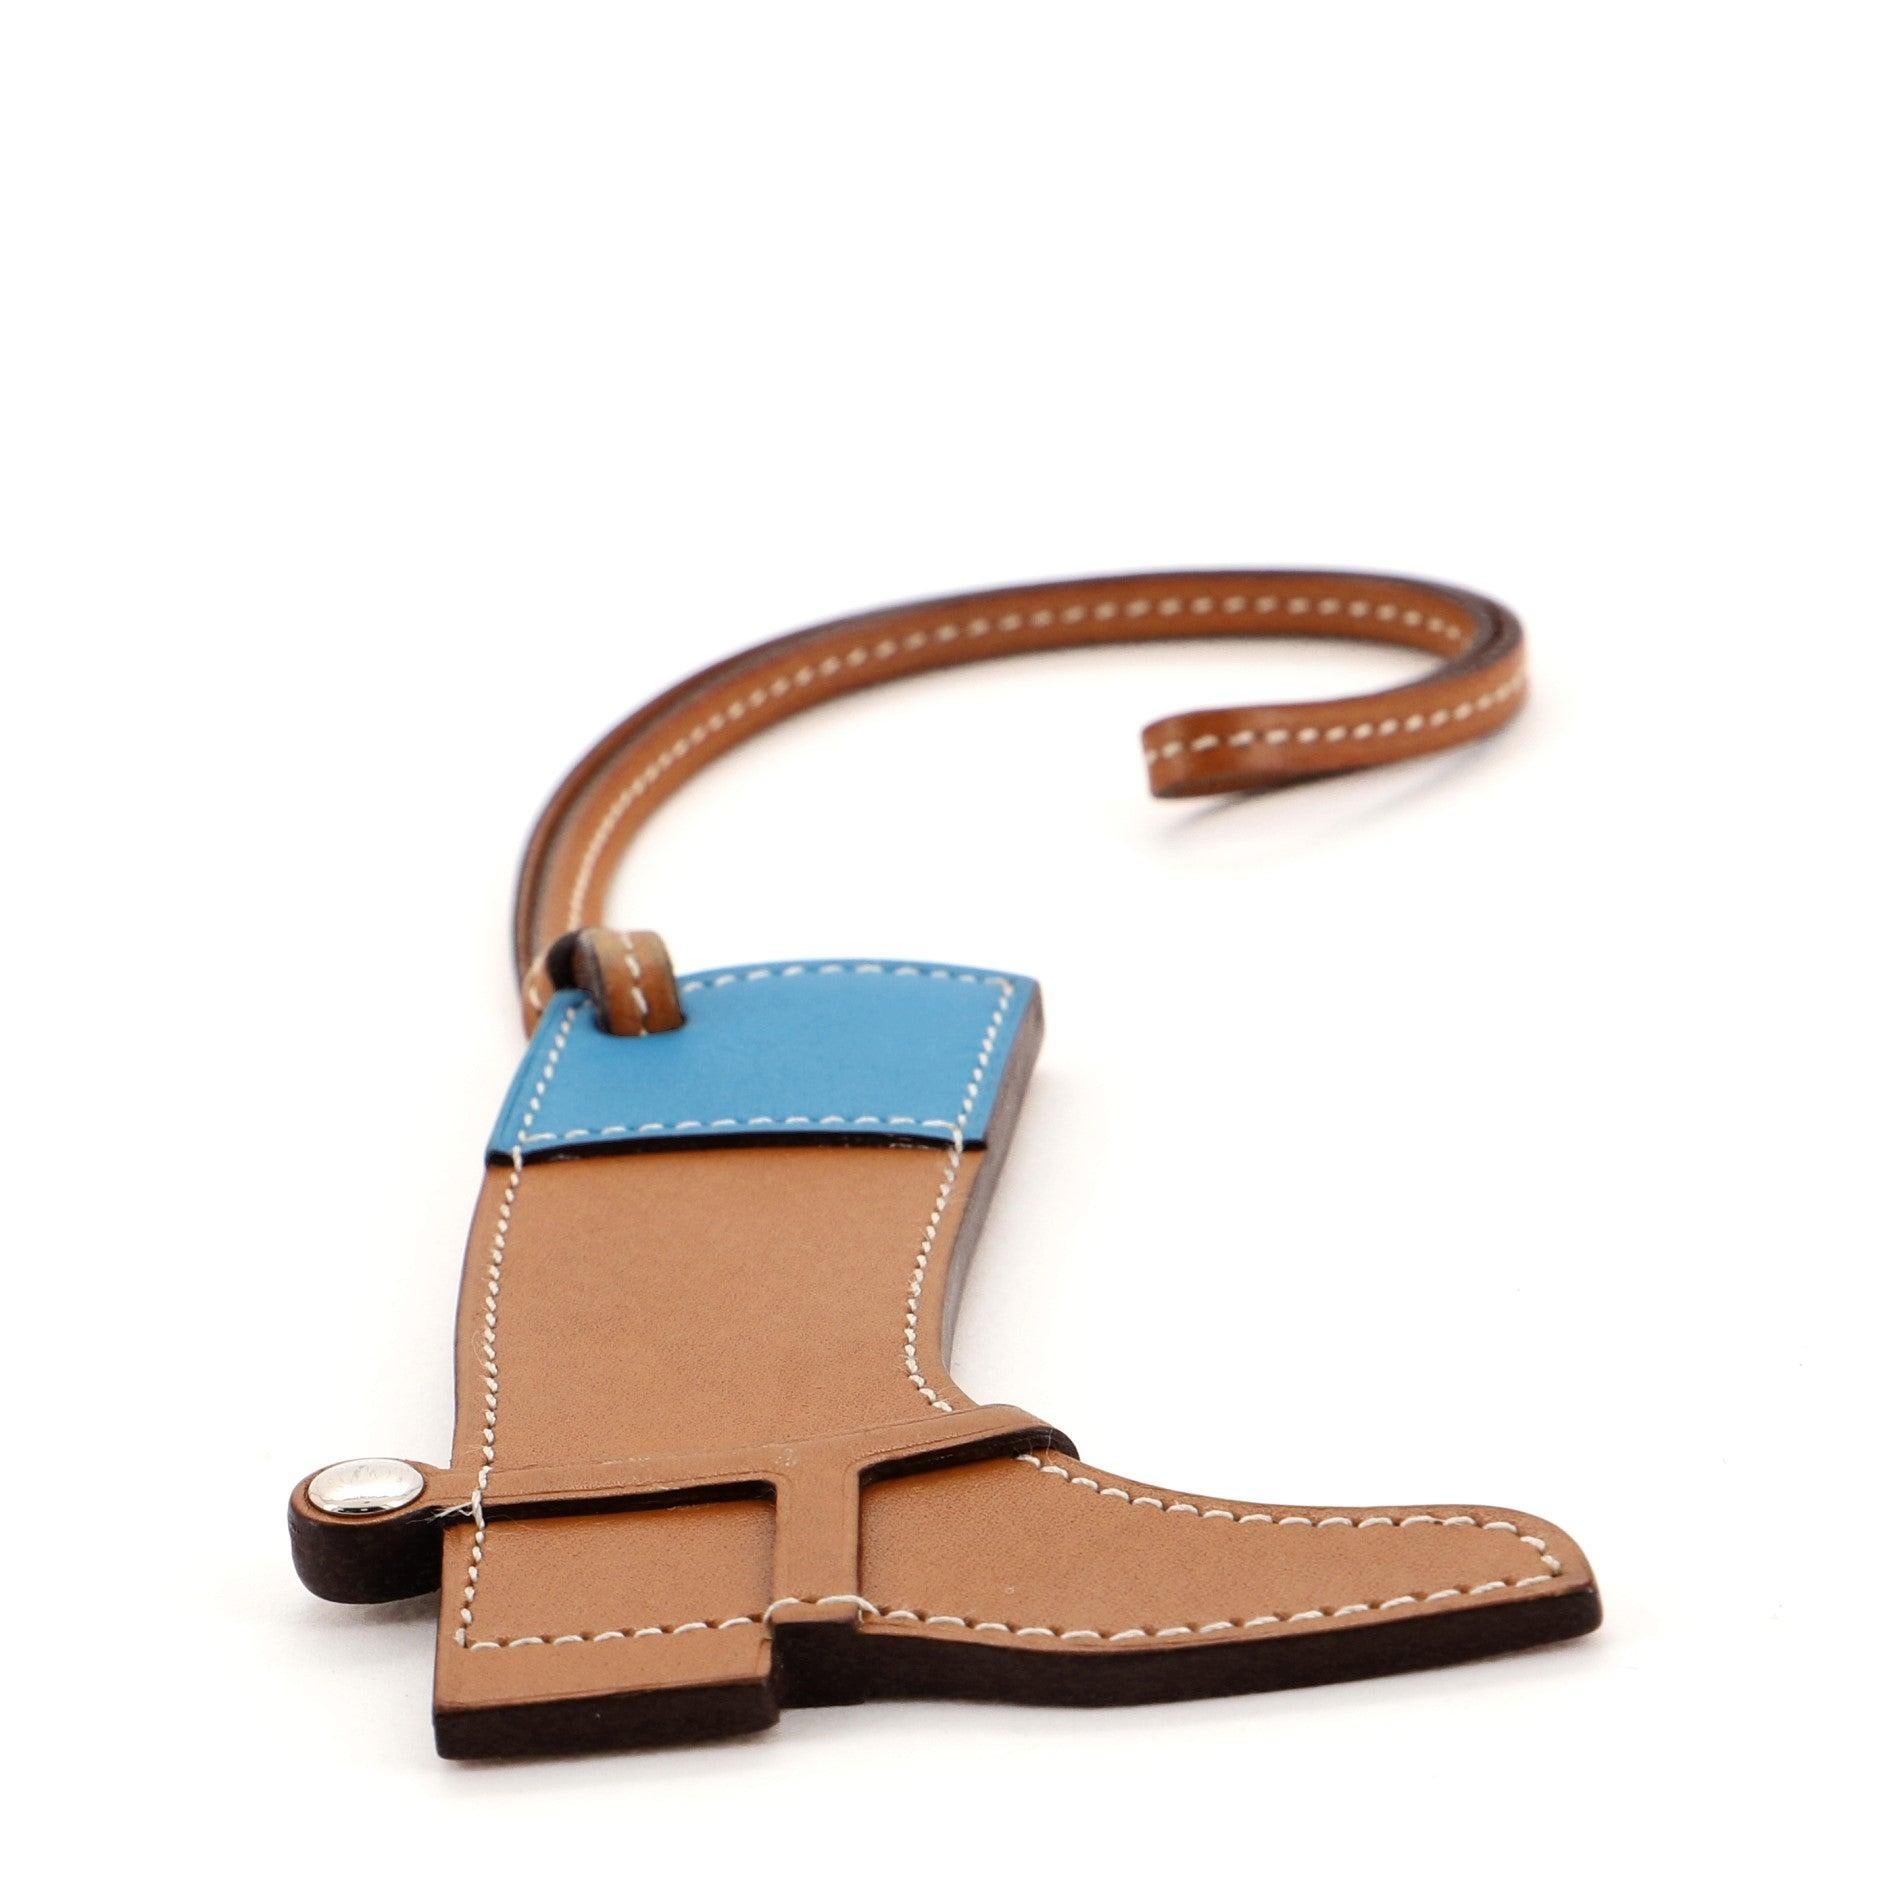 Hermes Paddock Boot Bag Charm Leather
Blue Brown Leather

Condition Details: Scuffs on exterior, wear and darkening on strap base, scratches on hardware.

50557MSC

Height 4